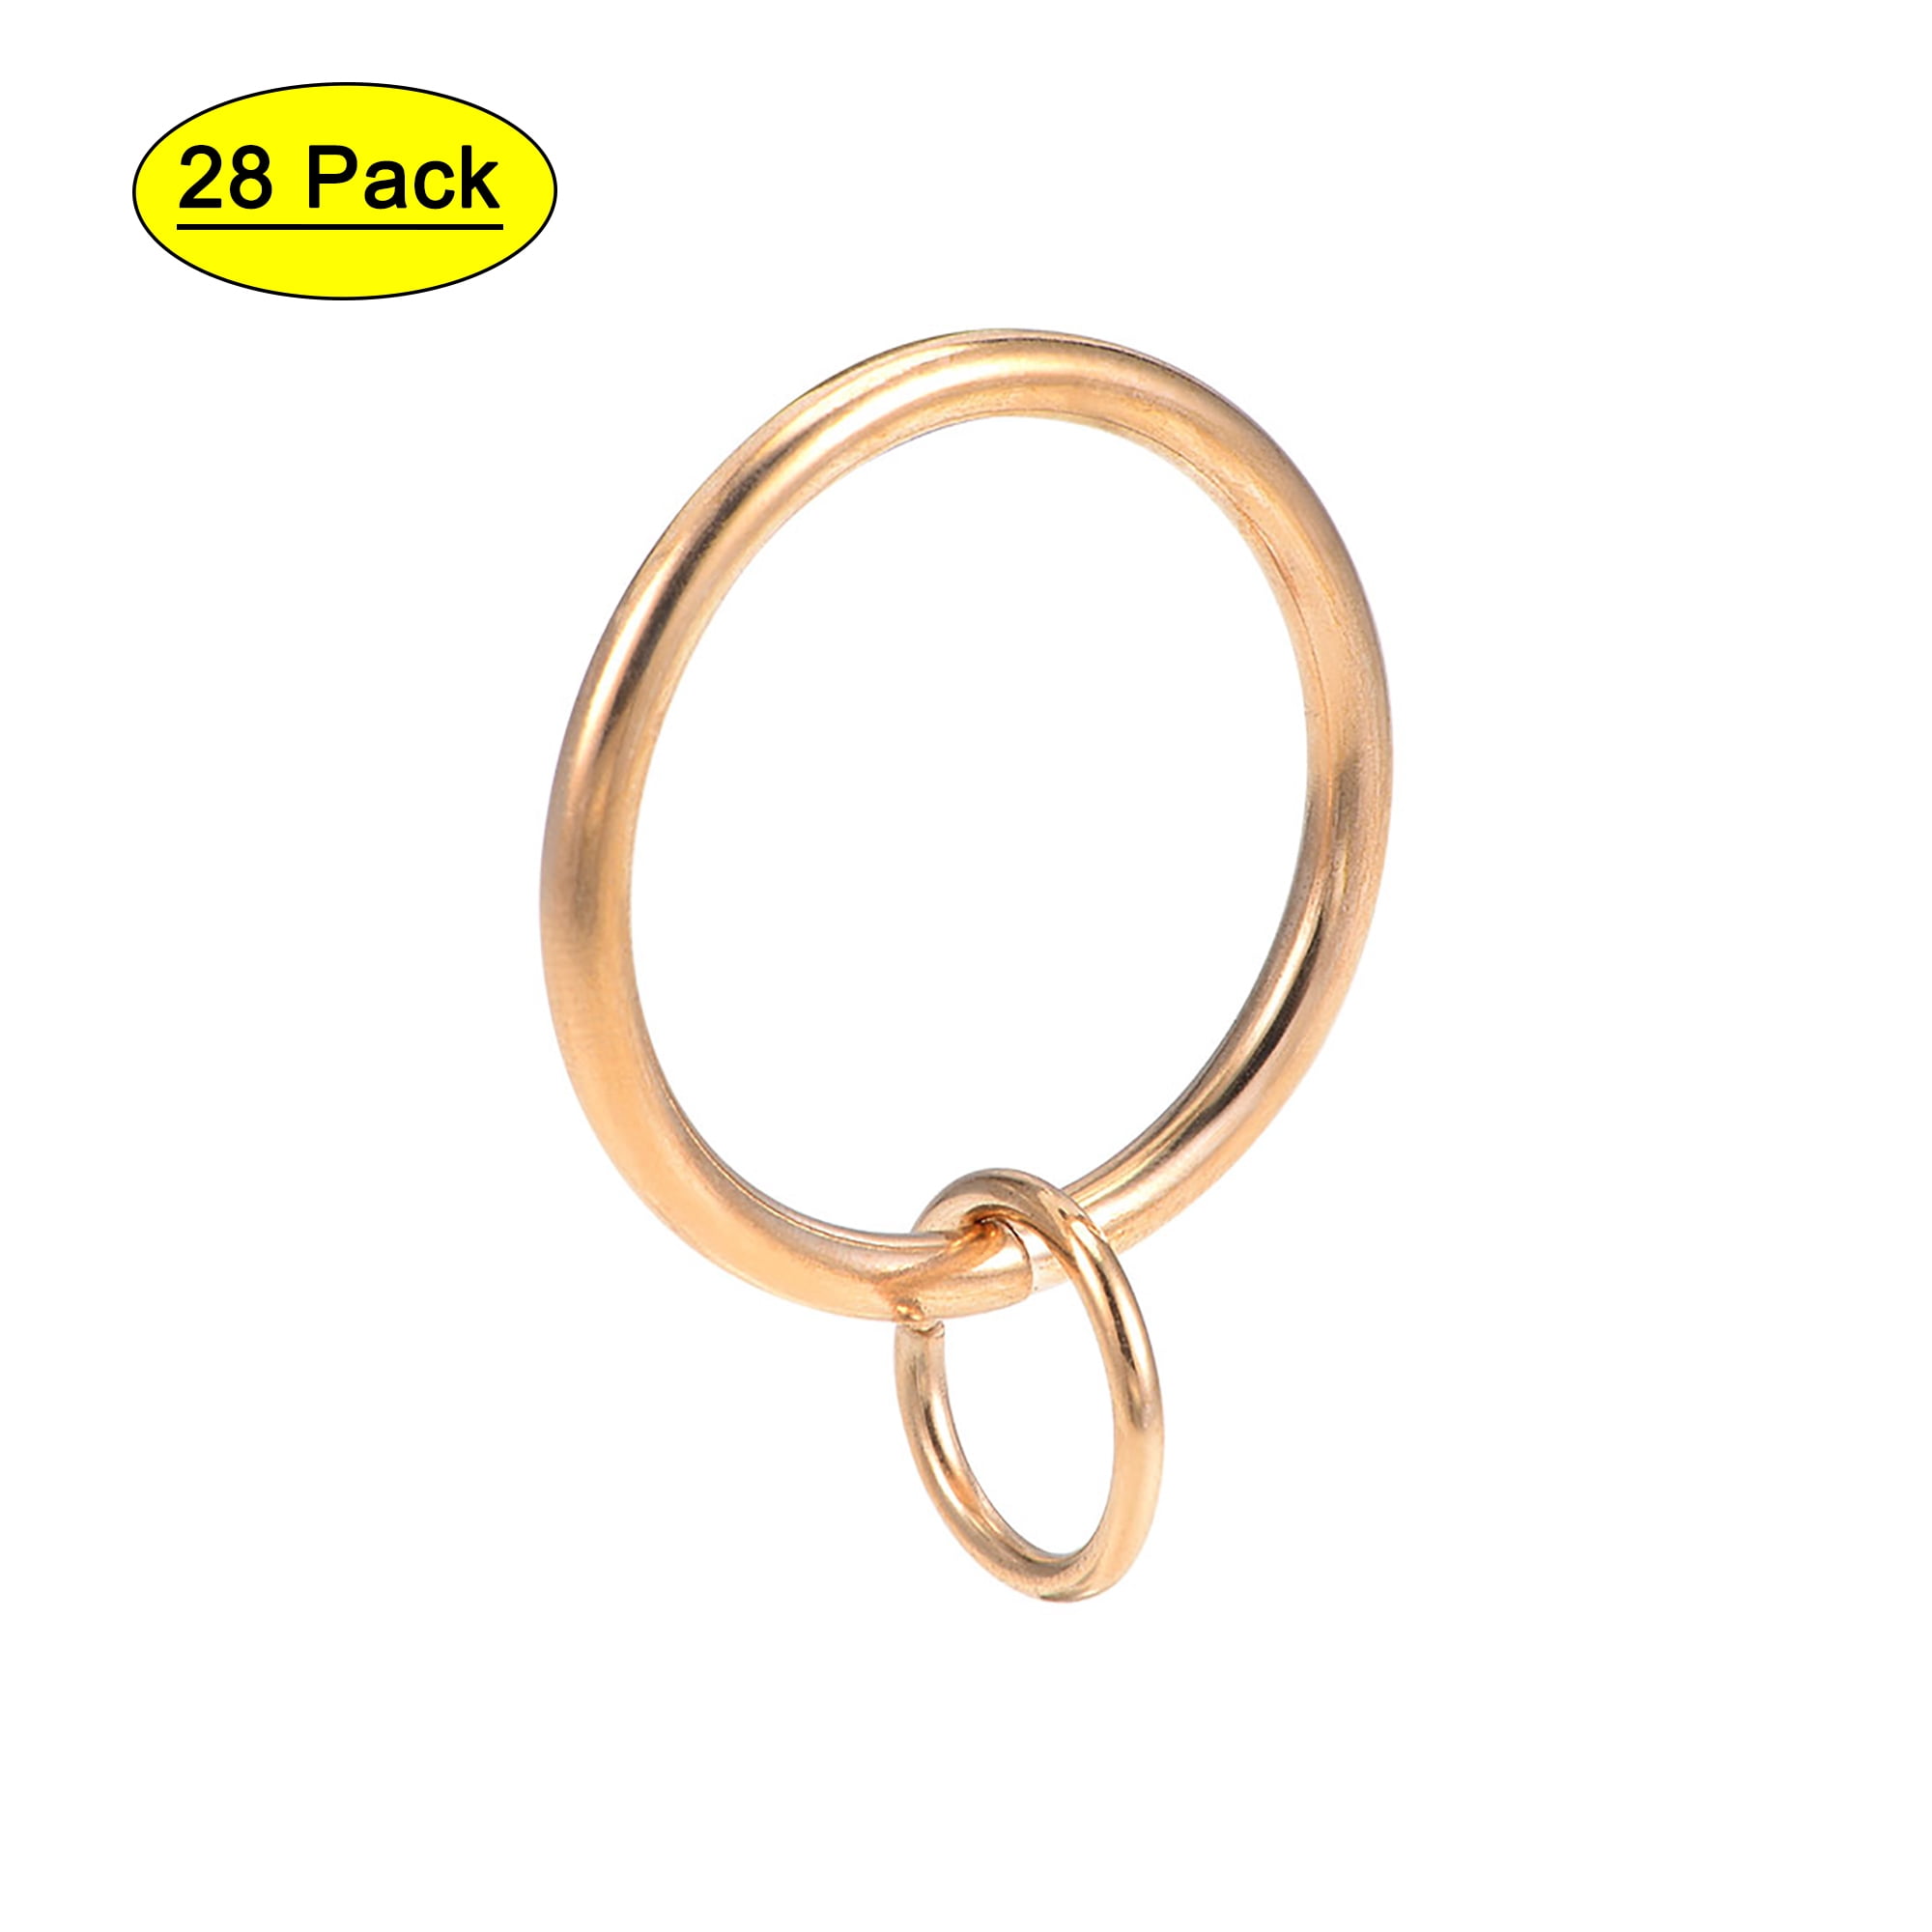 28mm Metal Curtain Rings with Removable Pinch Alligator Clips Multiple Pack Size 